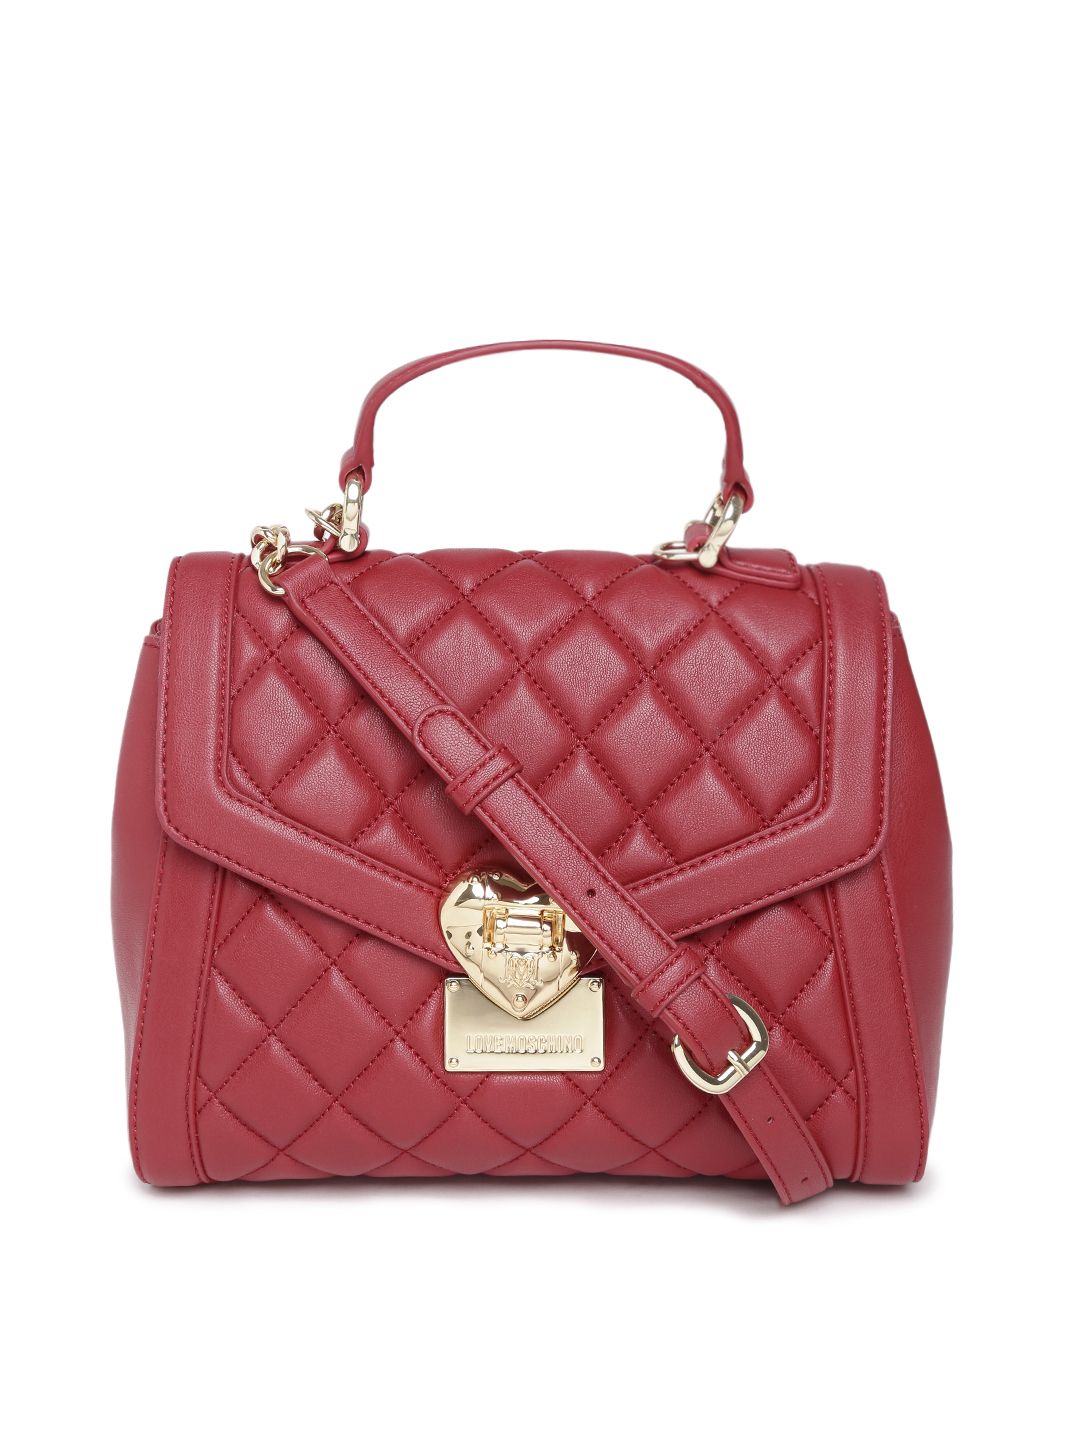 LOVE MOSCHINO Red Handmade Quilted Handbag with Sling Strap